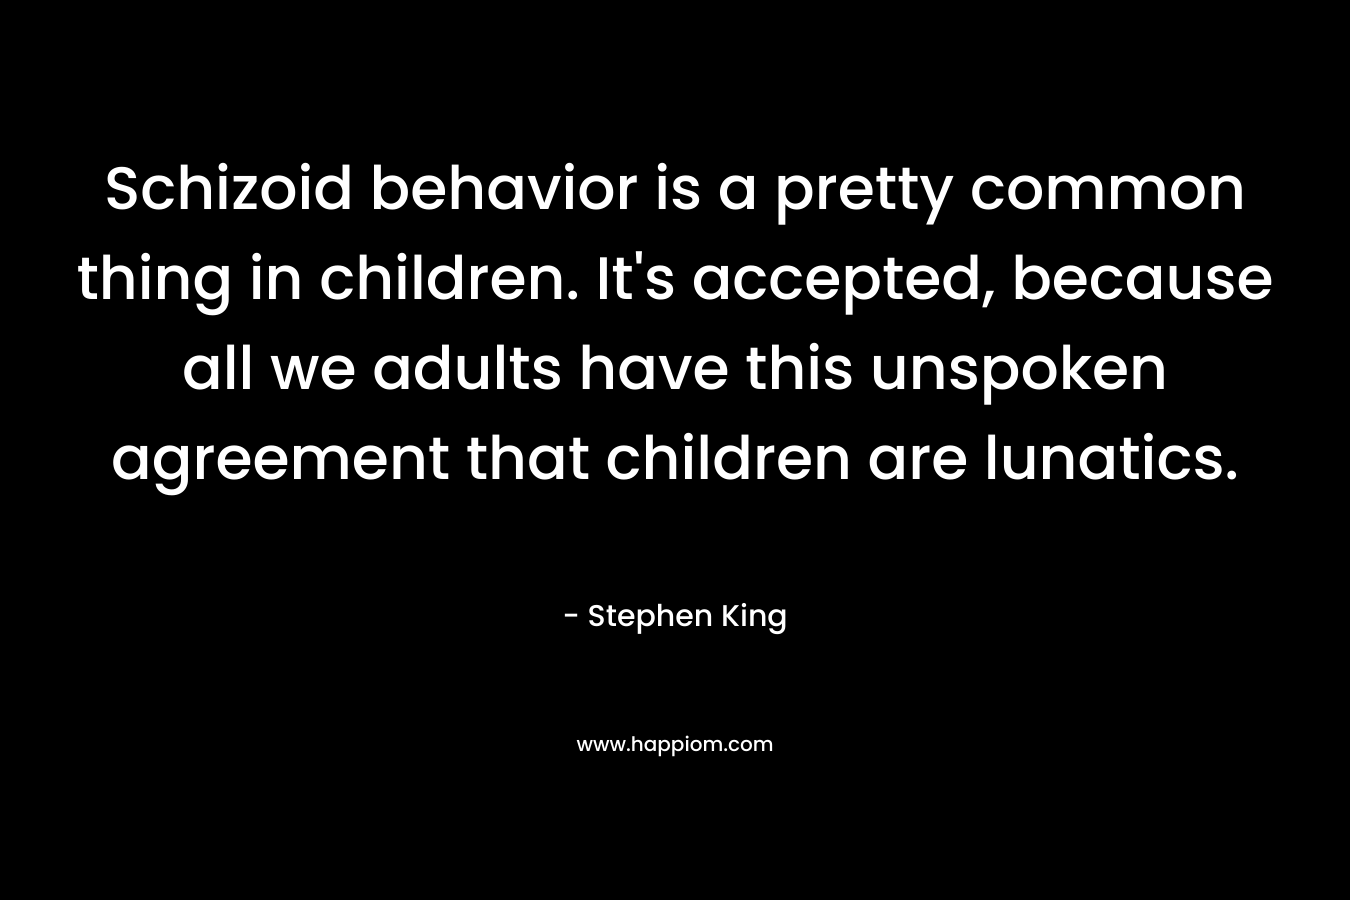 Schizoid behavior is a pretty common thing in children. It's accepted, because all we adults have this unspoken agreement that children are lunatics.